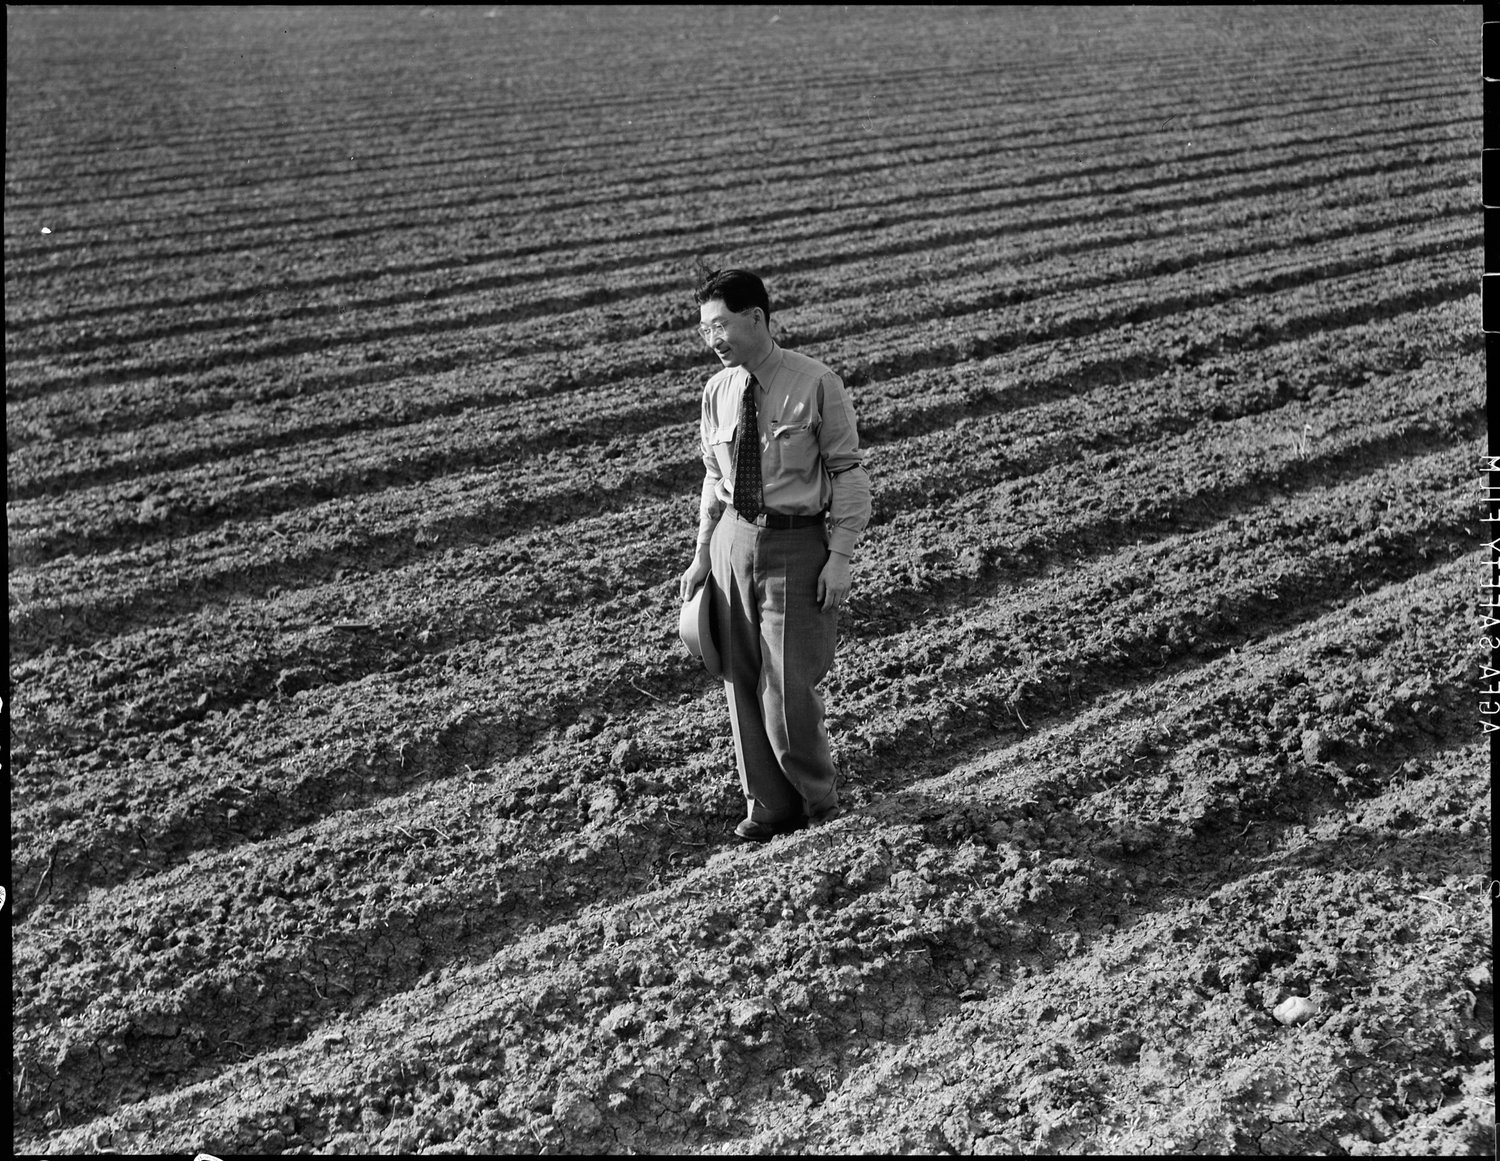  PRINT AVAILABLE Mountain View, California. Henry Mitarai, 36, in one of his sugar beet fields on his mechanized farm, prior to evacuation. His payroll ran as much as 8,000.00 a year. Farmers and other evacuees of Japanese descent will be given opportunities to follow their callings at War Relocation Authority centers where they will spend the duration. 